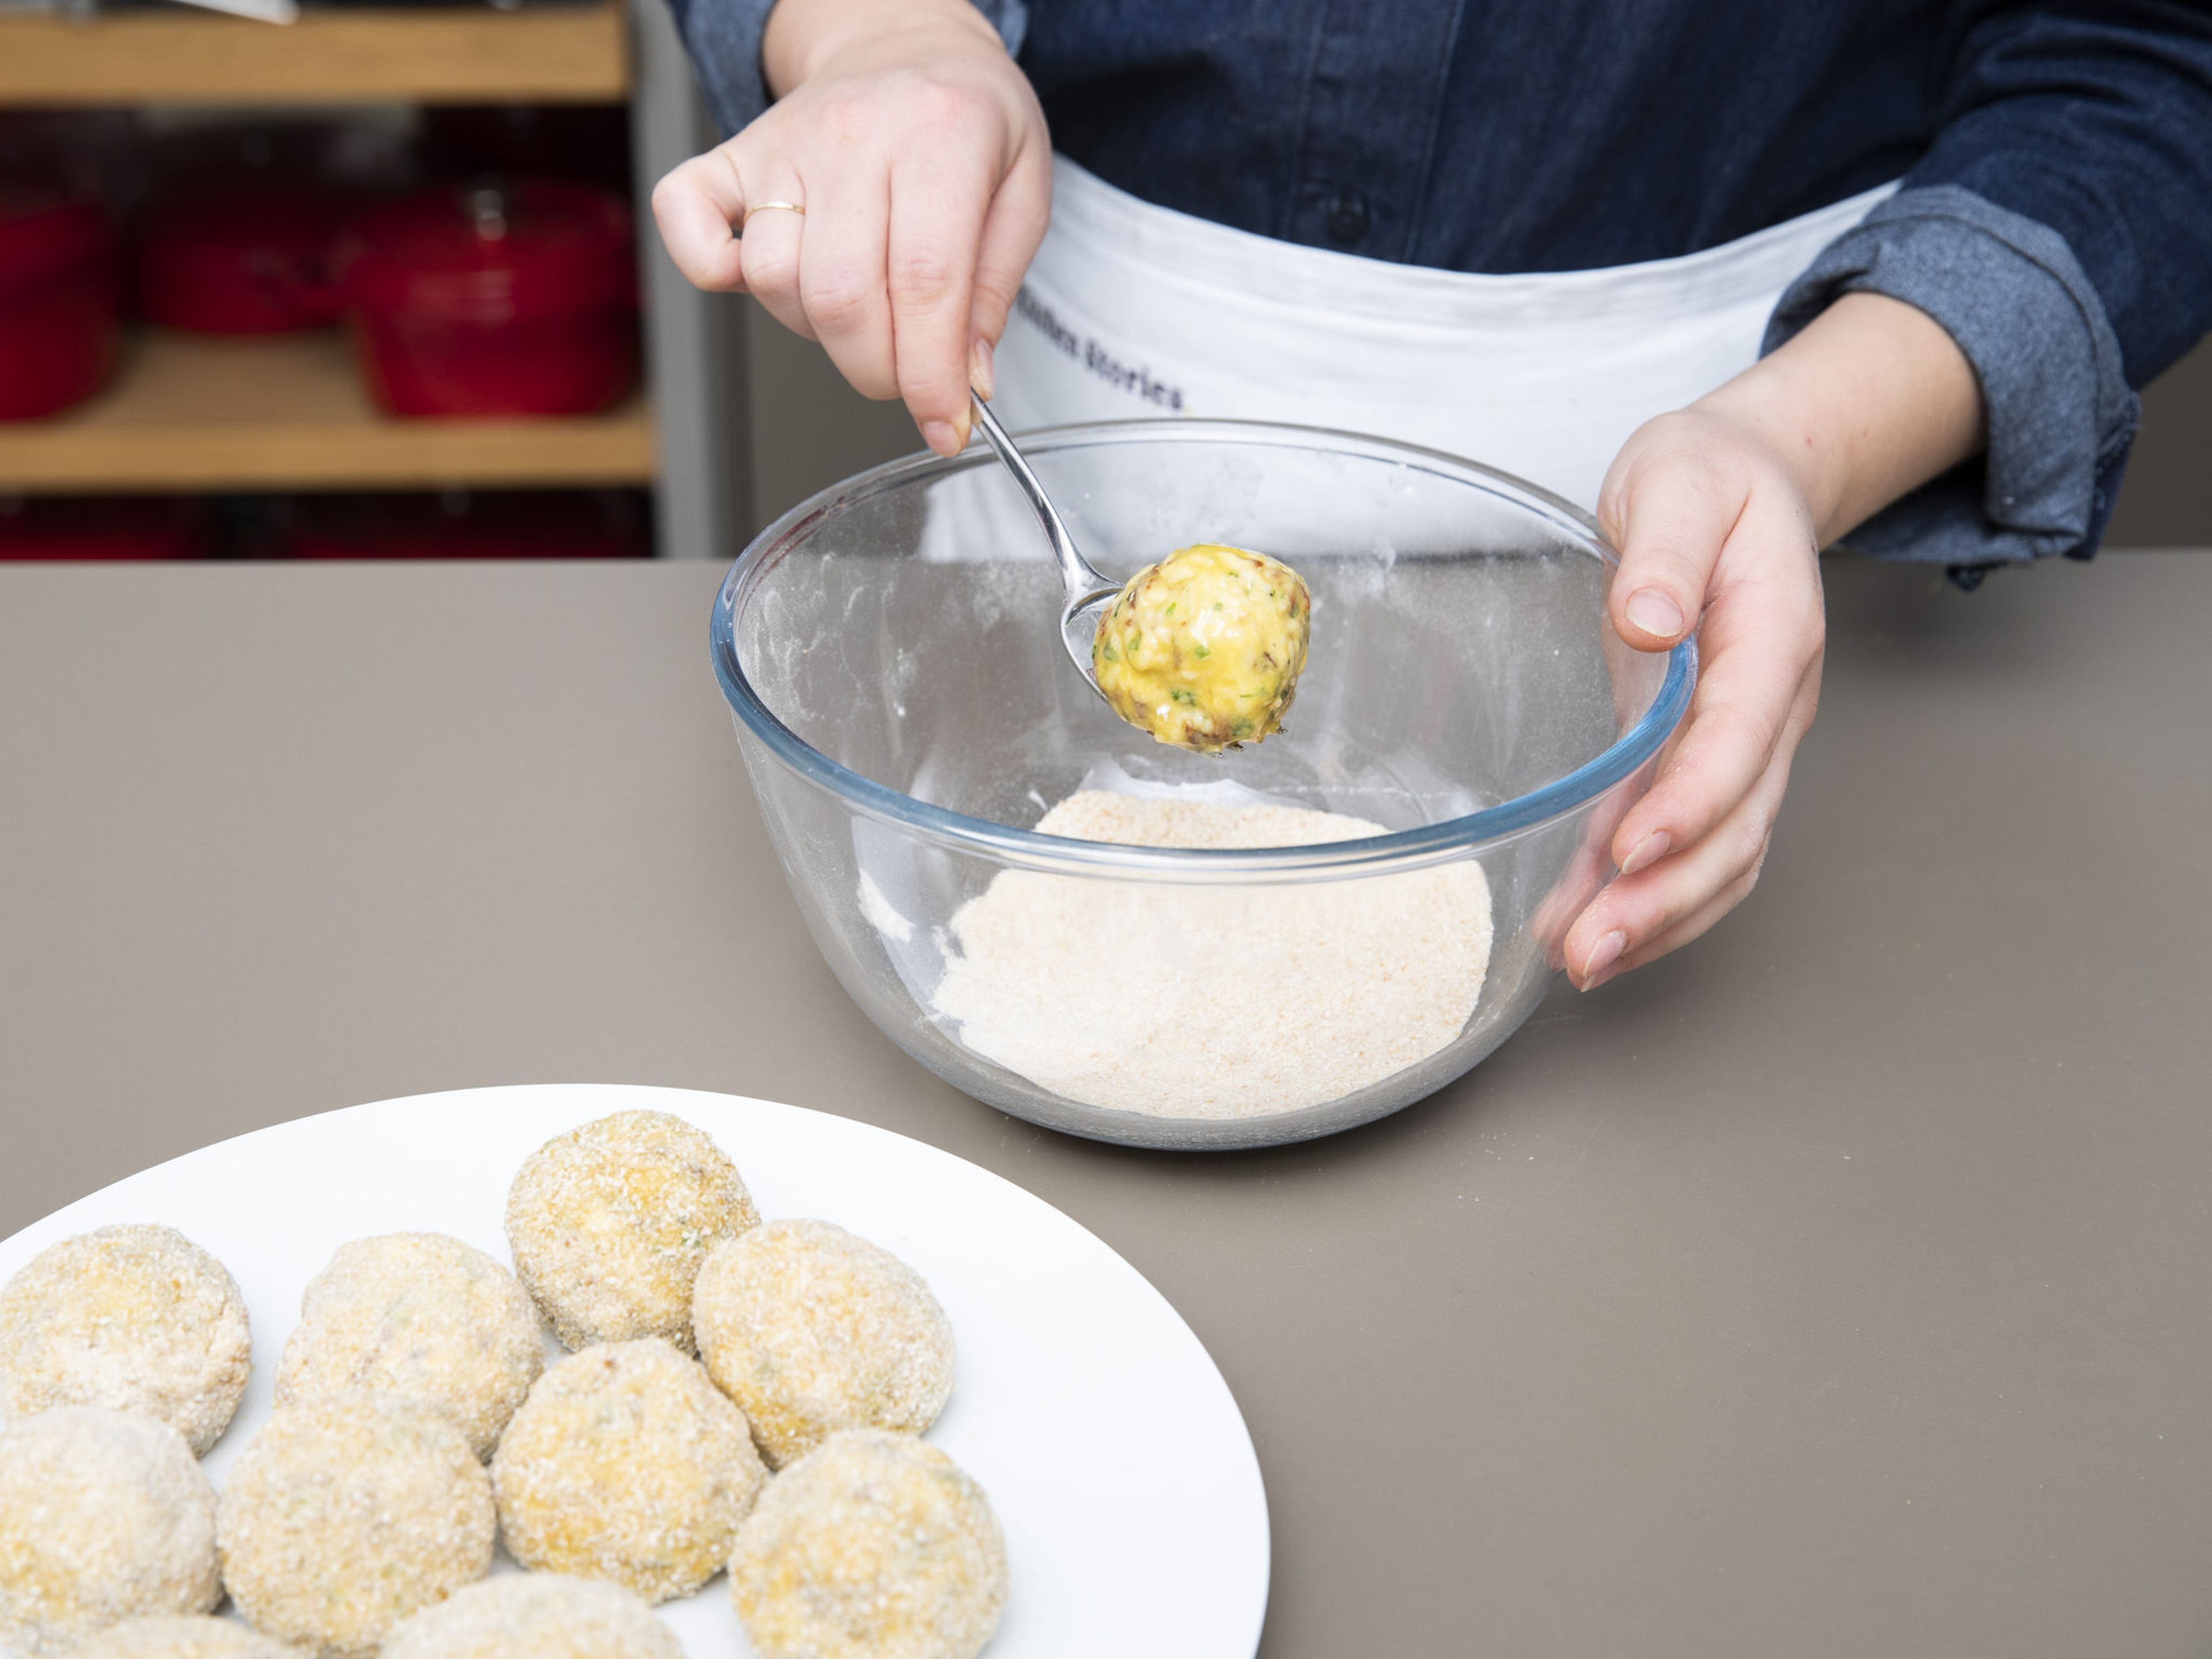 Prepare three shallow bowls for breading. One for the flour, one for the lightly beaten egg, and one for the breadcrumbs. Cover each arancini in flour, then beaten egg, and then breadcrumbs, using either your hands or a fork.